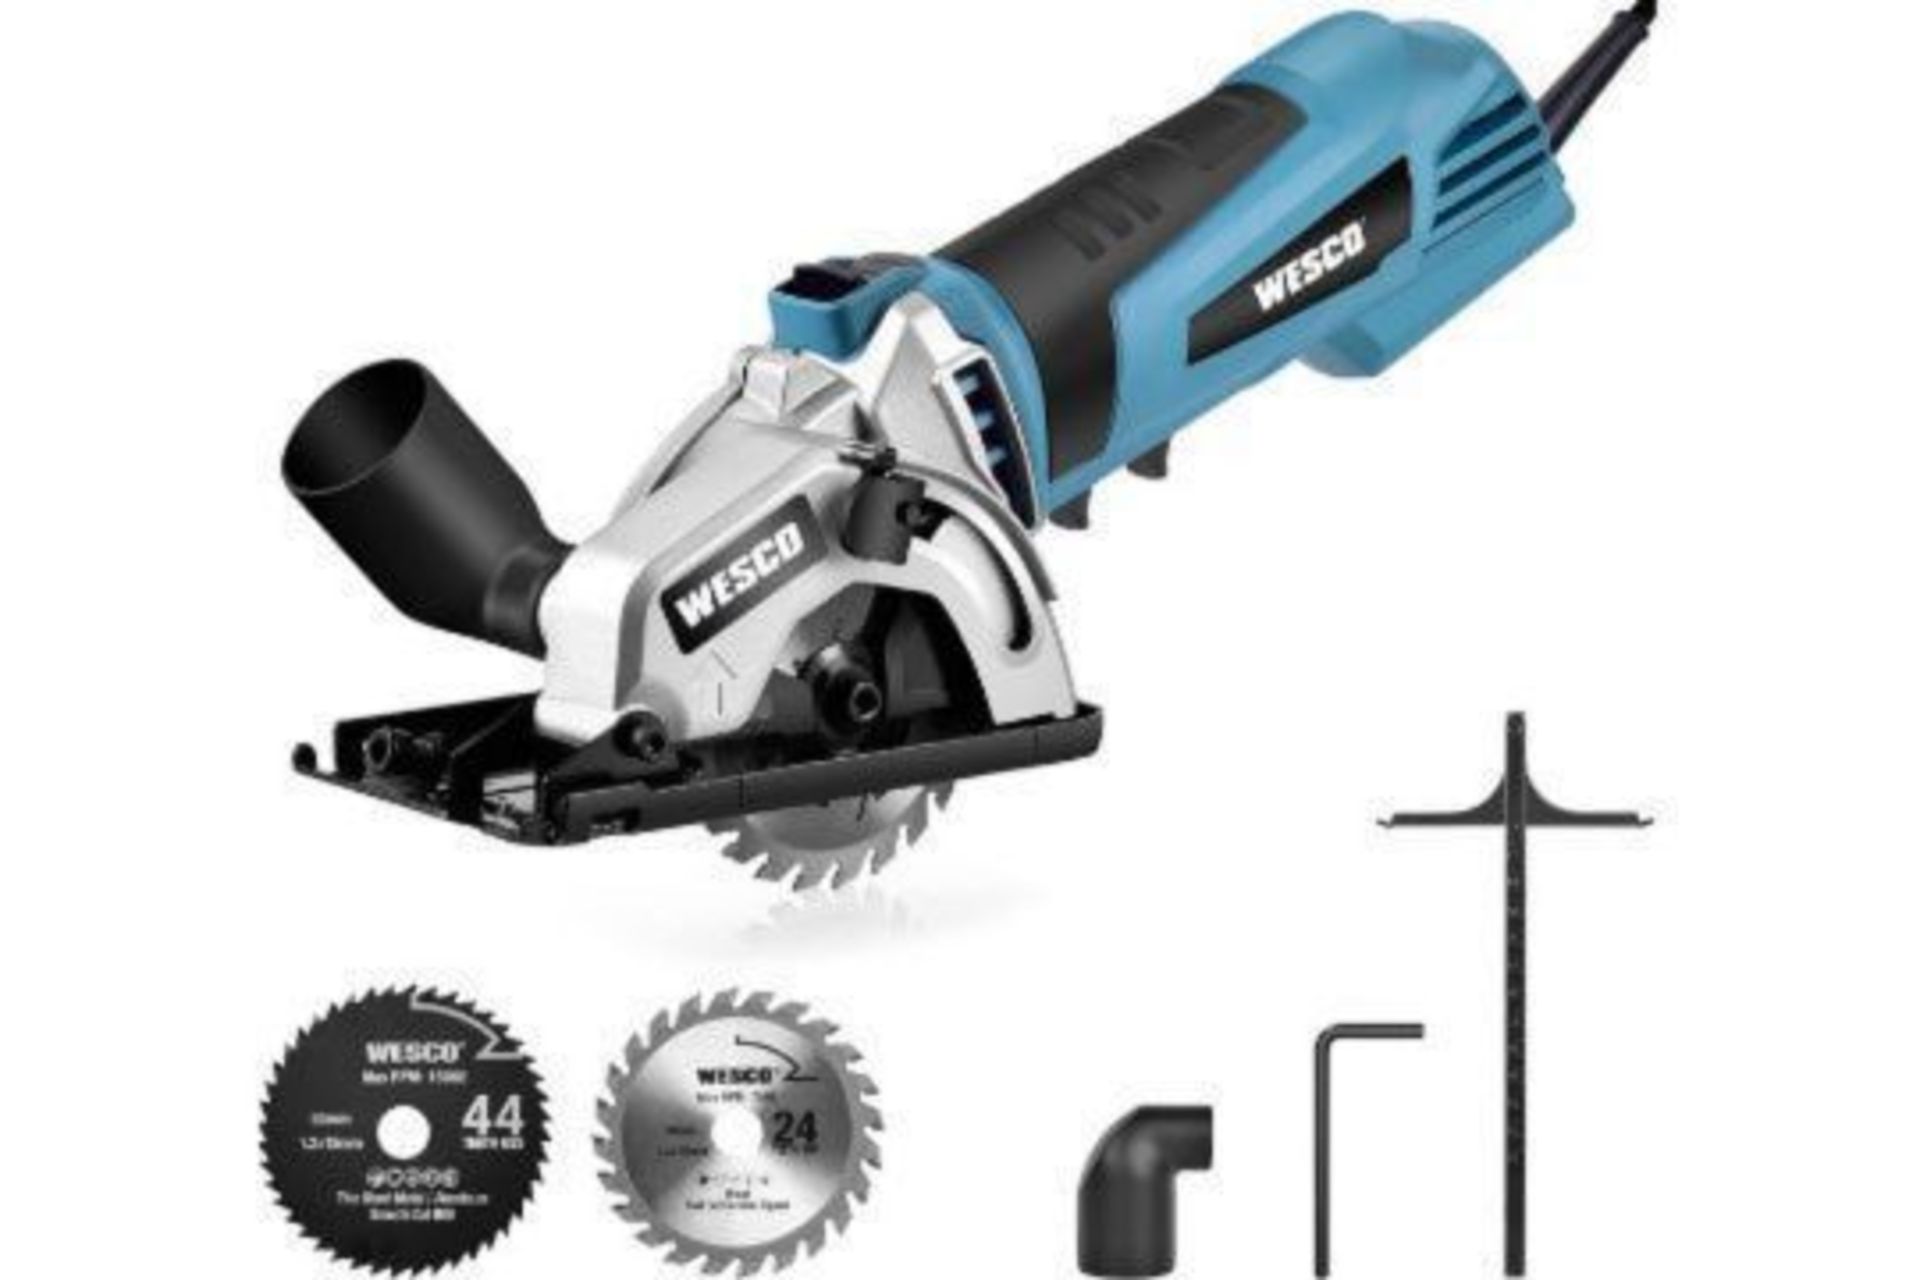 TRADE LOT 10 x NEW BOXED WESCO 500W 5100 RPM Compact Circular Saw with 2 Saw Blades Cutting Depth